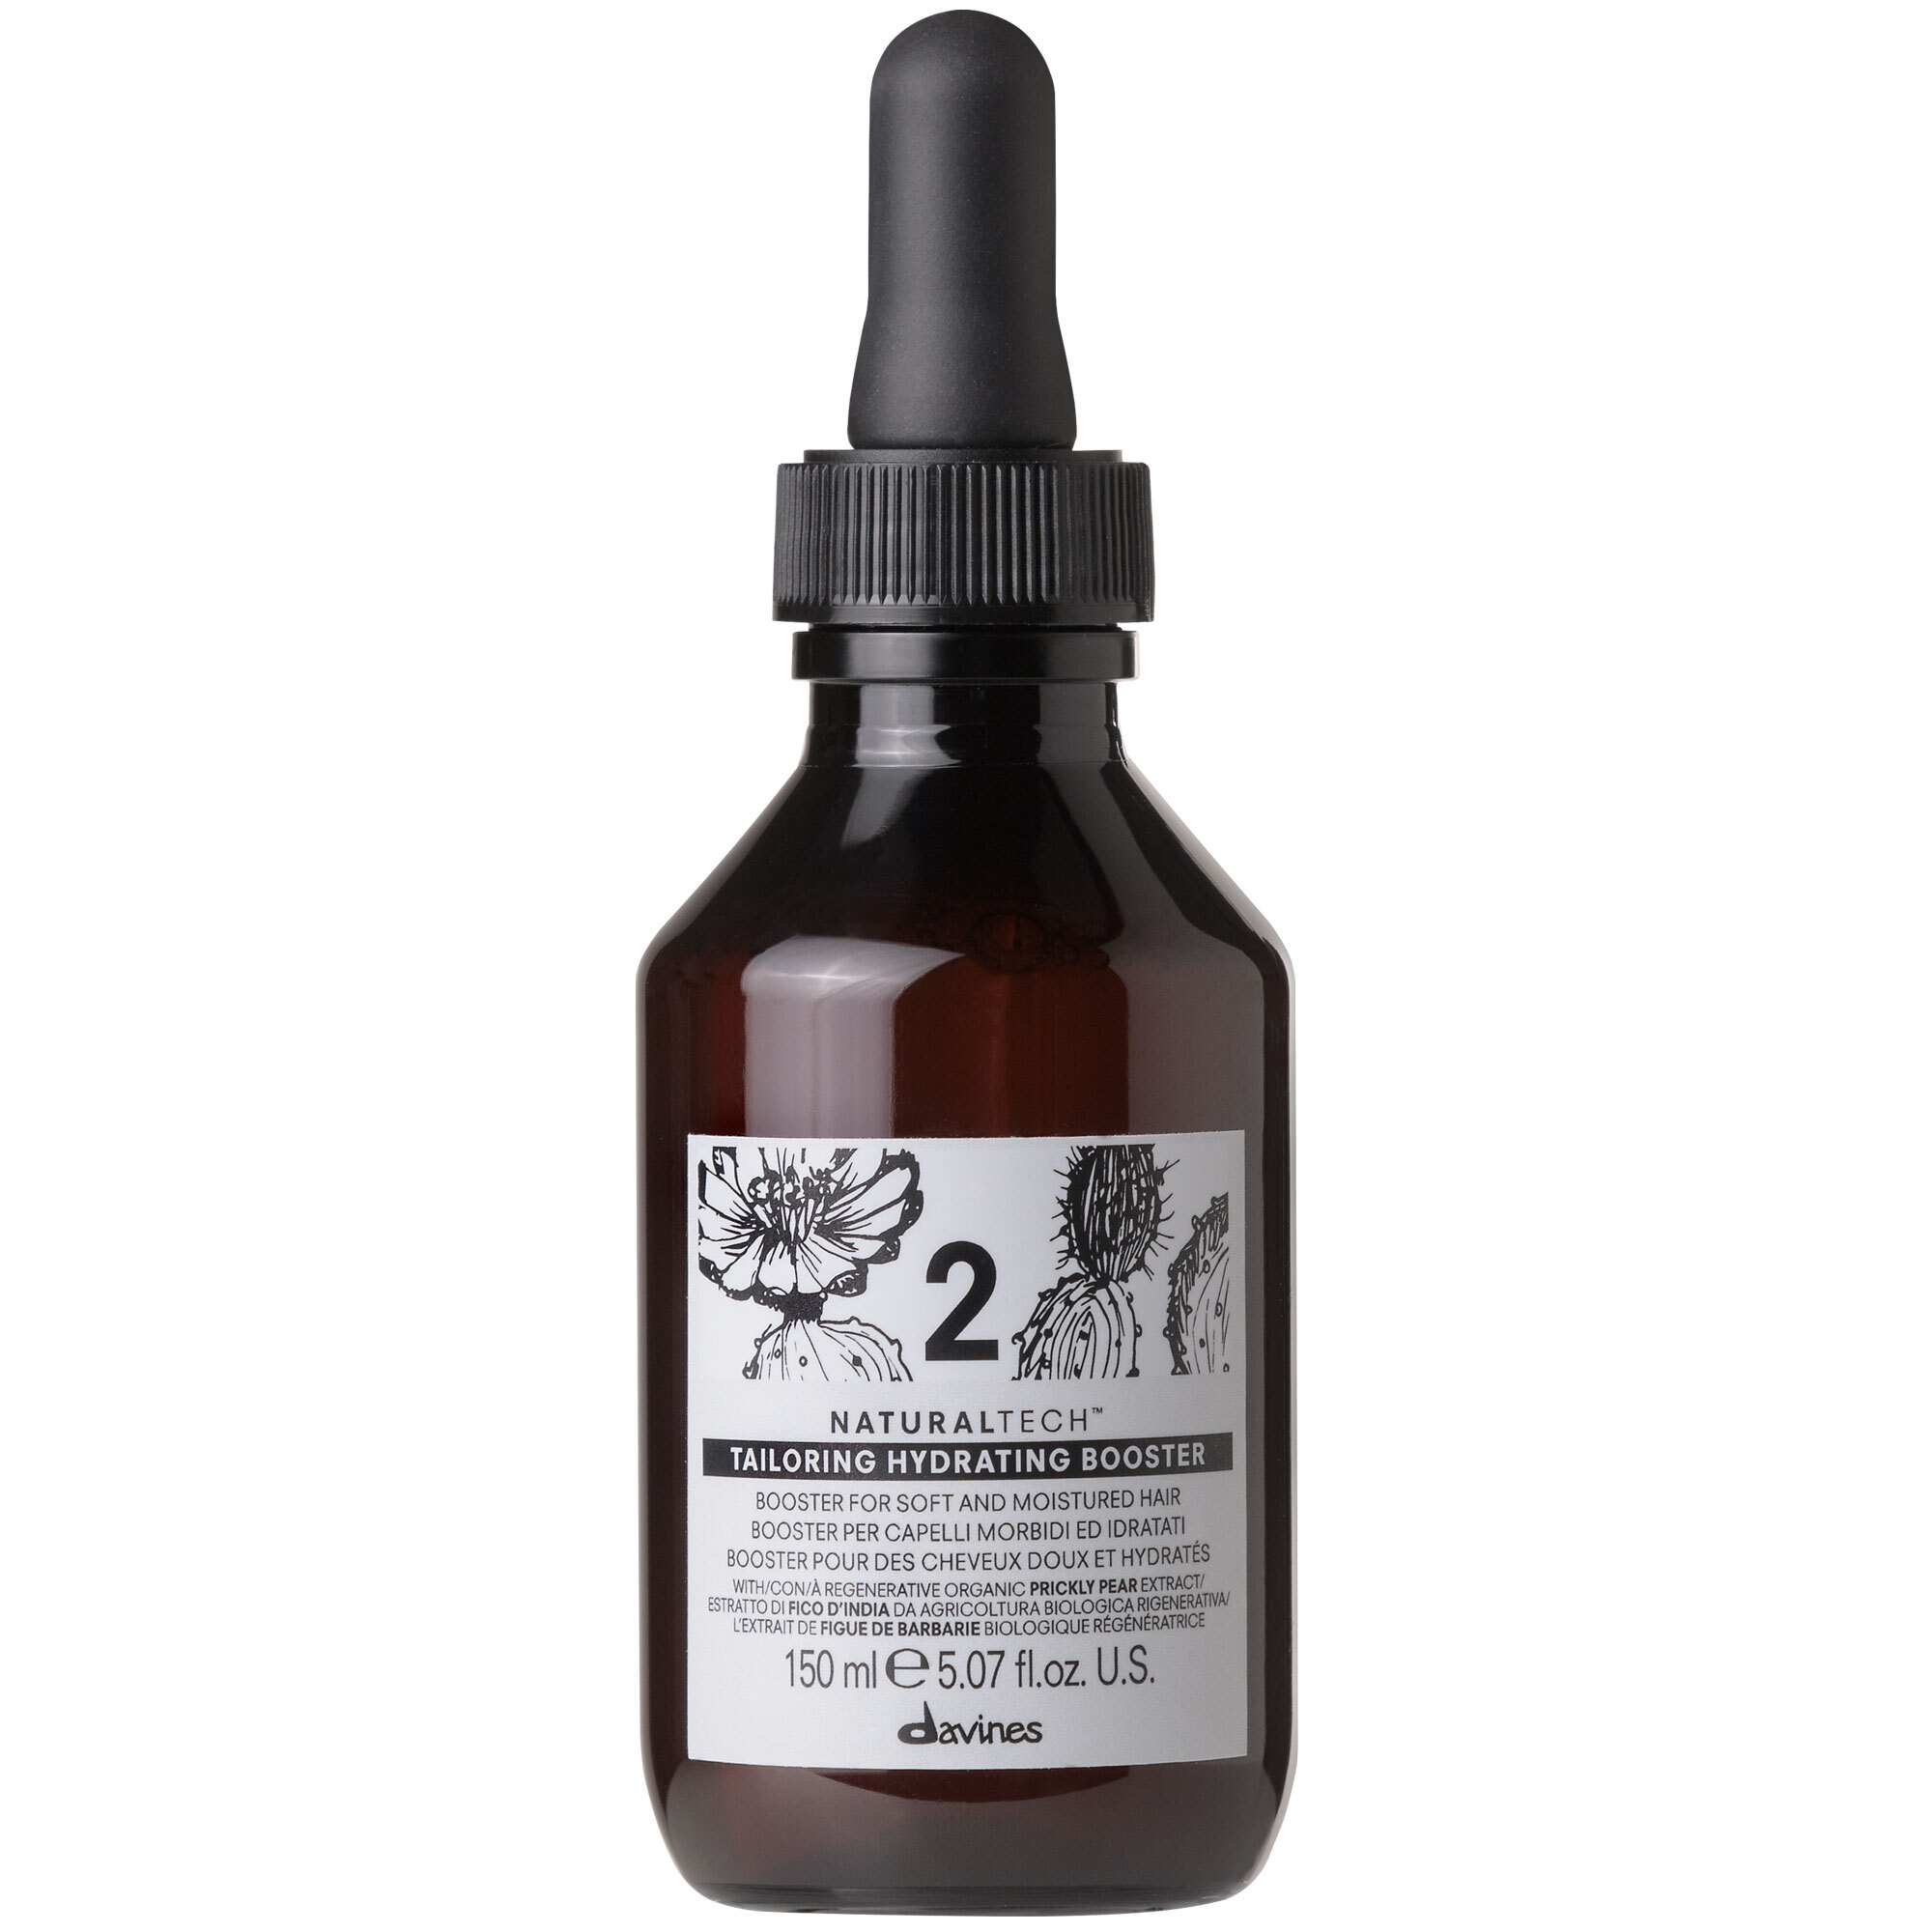 Davines NaturalTech Tailoring: 2 Booster Hydrating